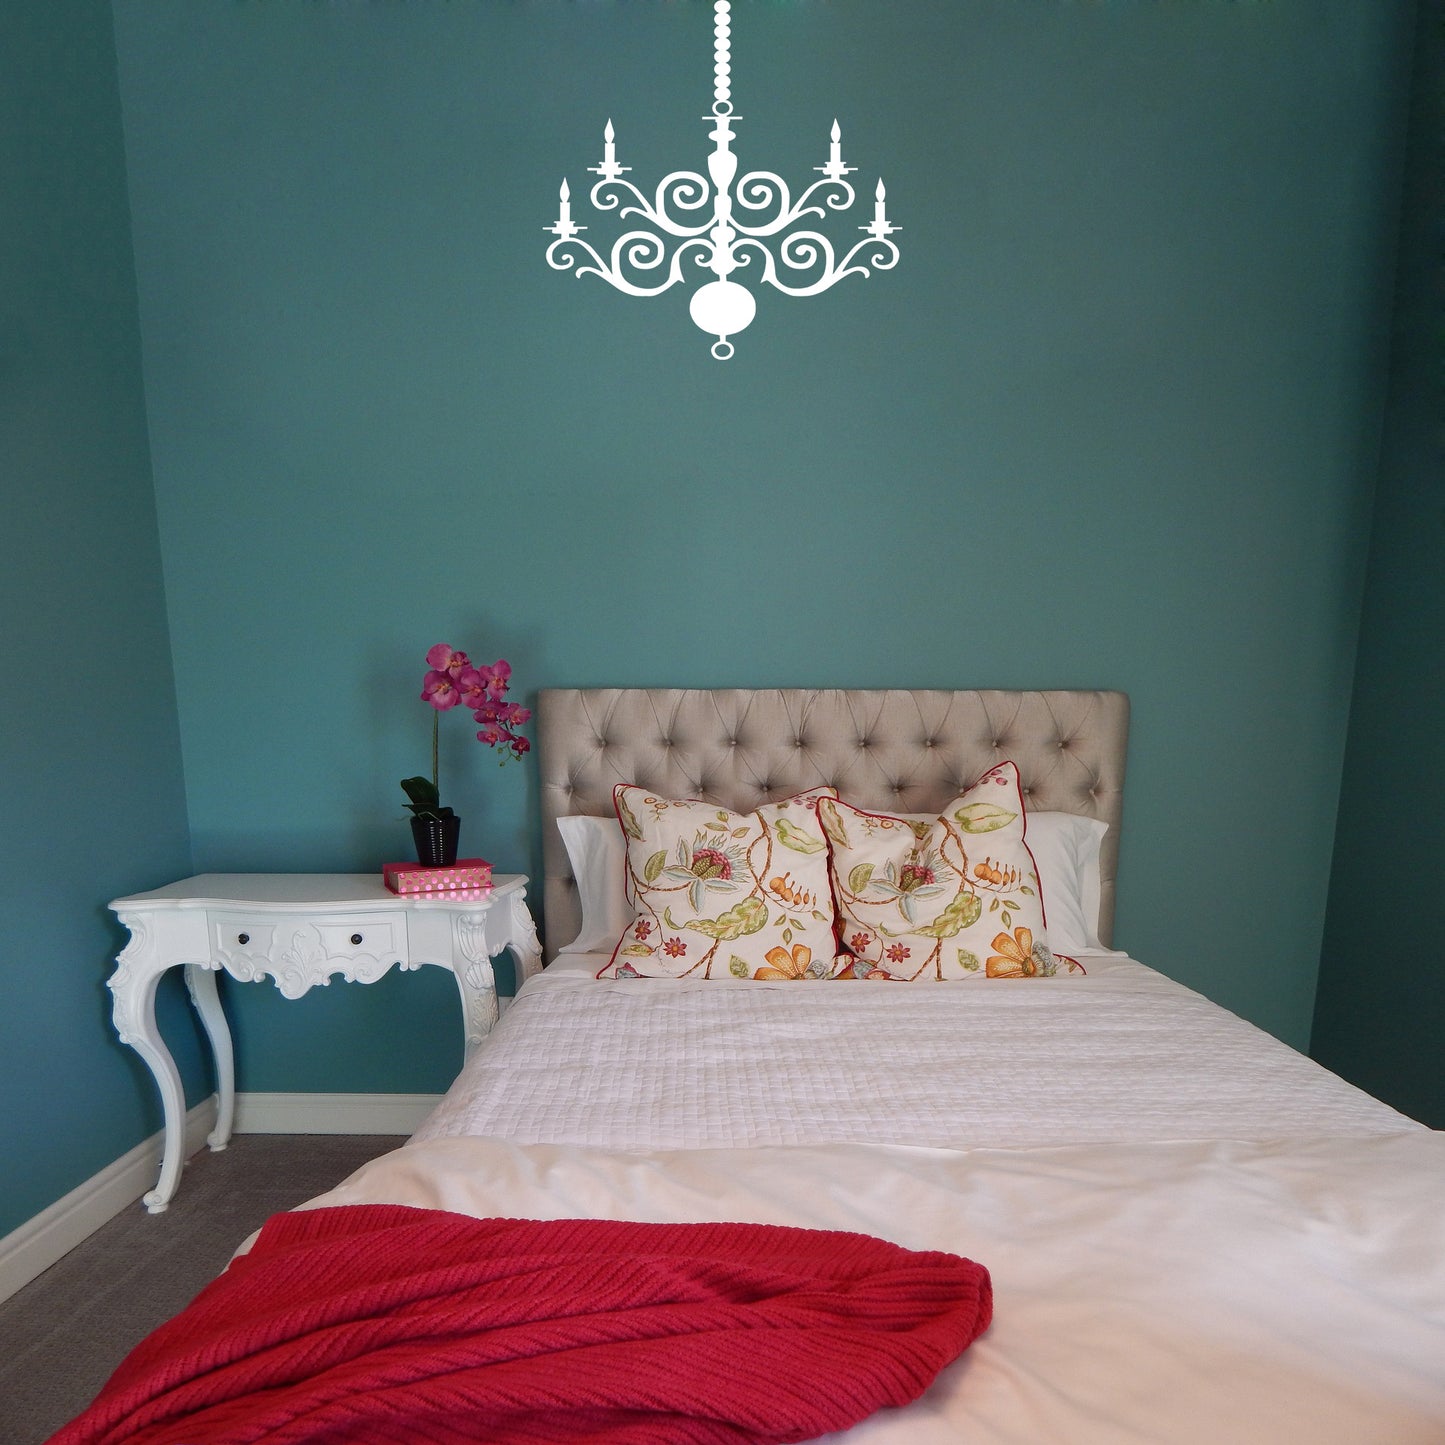 Chandelier | Wall decal - Adnil Creations